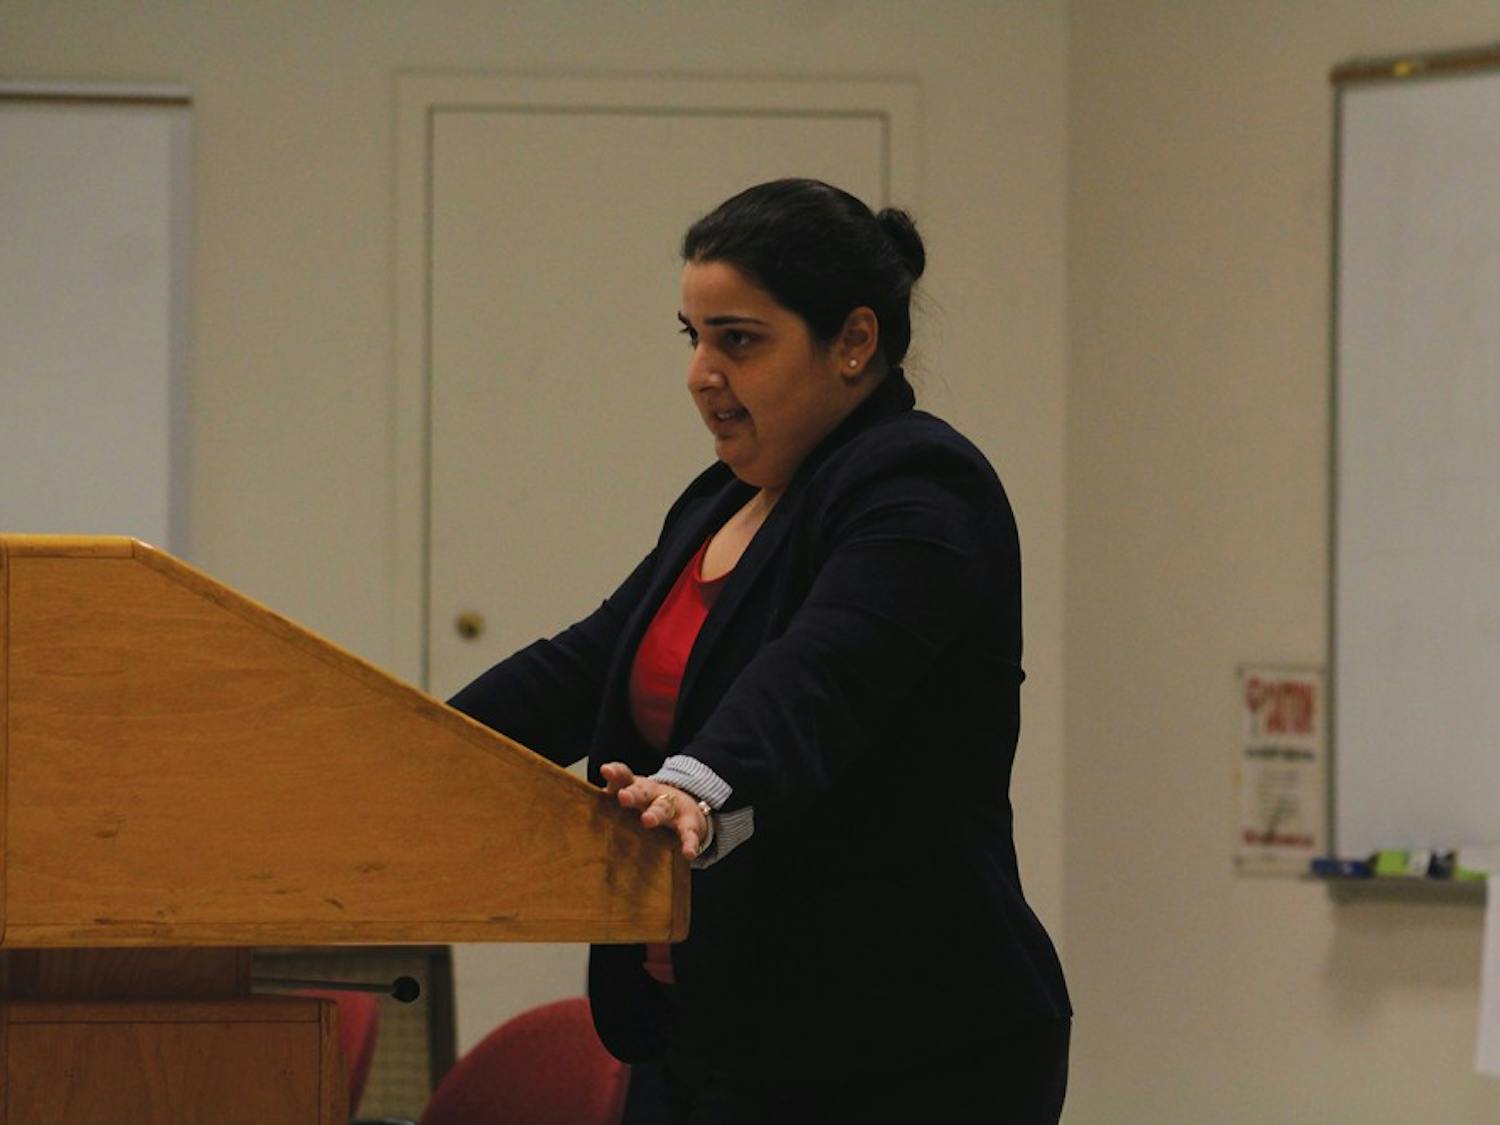 Ana Sofia Nuñez, an immigration attorney from Raleigh, discusses House Bill 63 and immigrants' rights on Wednesday during a panel on the topic of undocumented immigrants.